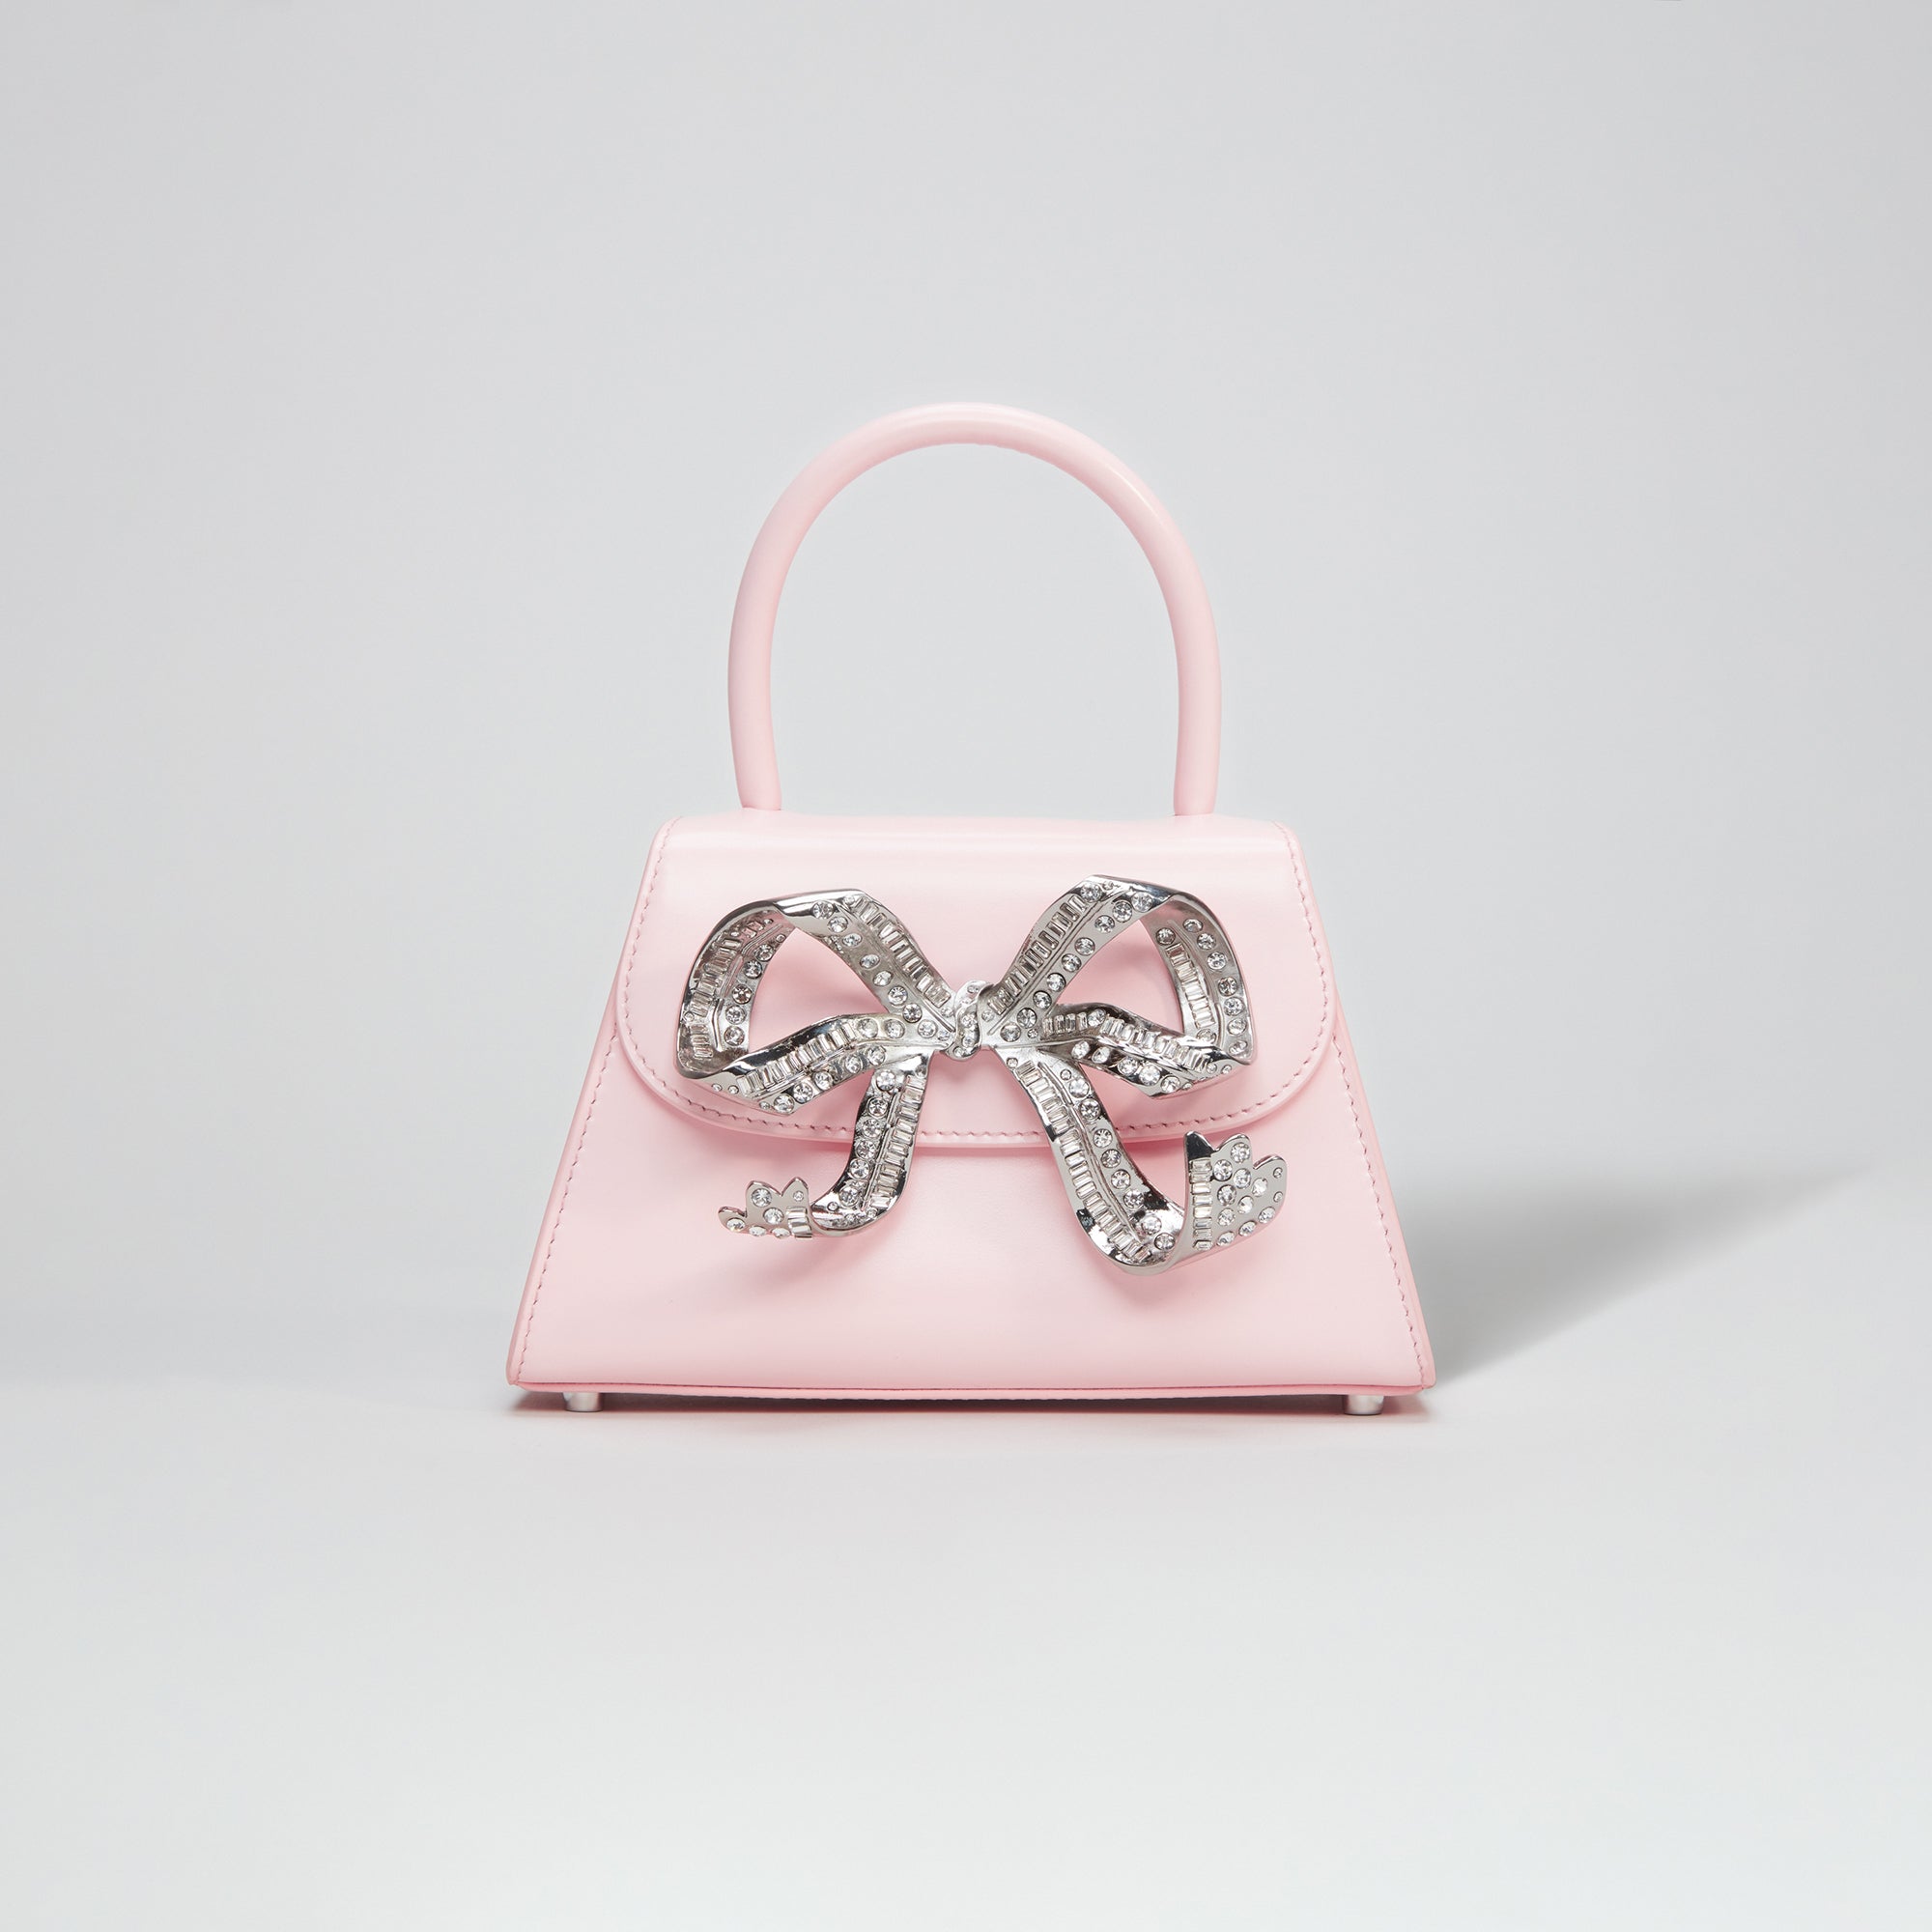 The Bow Mini in Pink with Diamanté